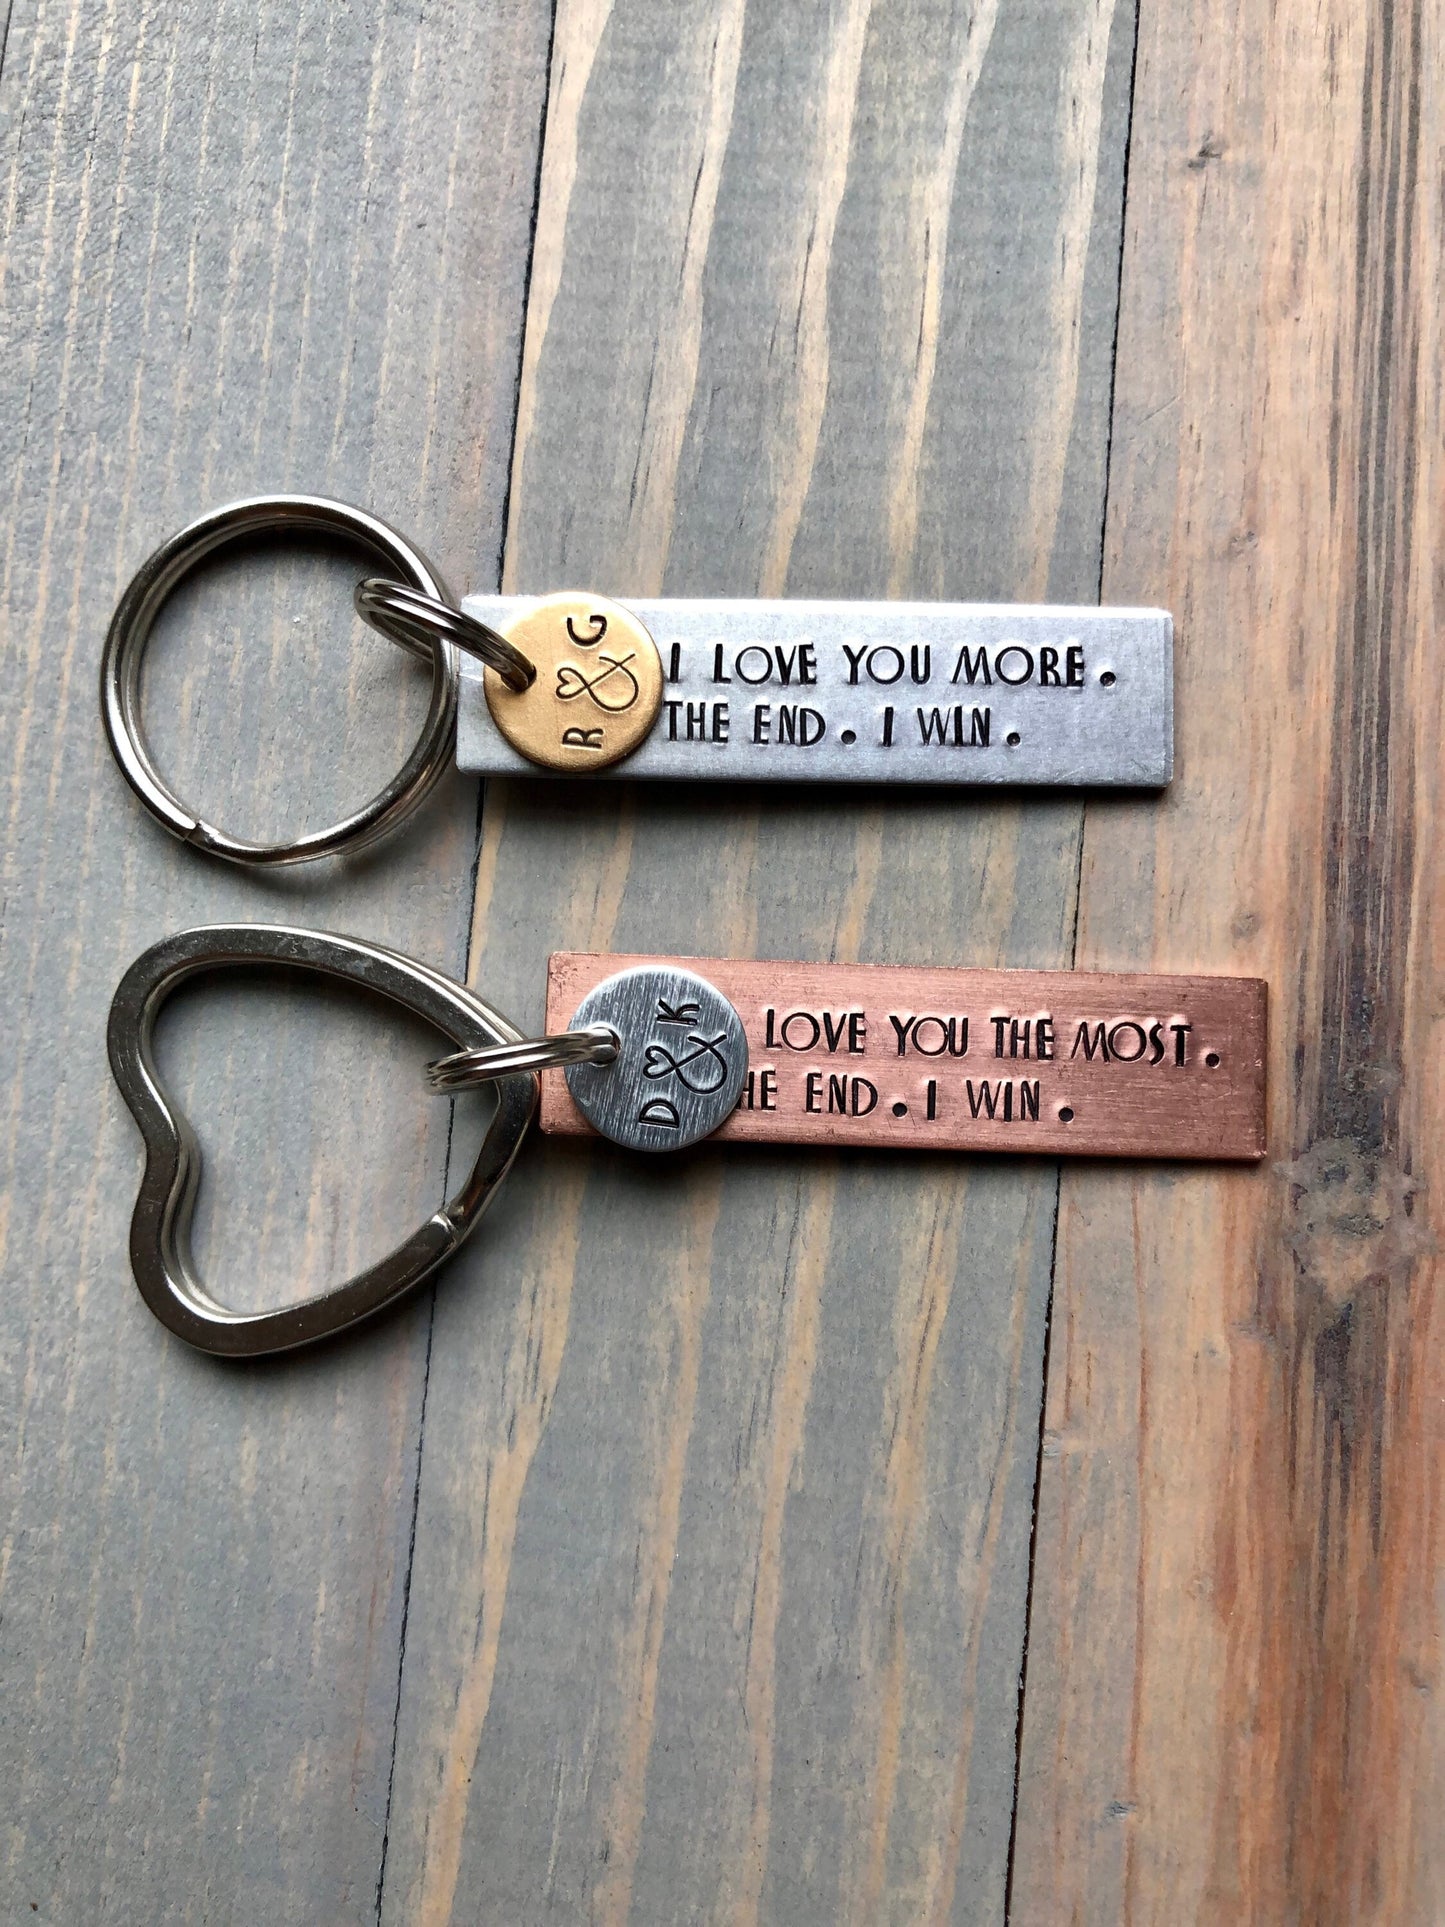 Valentine's Day Gift, I Love You More, Gift for Him, Gift for Her, Anniversary, The End I Win, Boyfriend Girlfriend Gift, Birthday Keychain